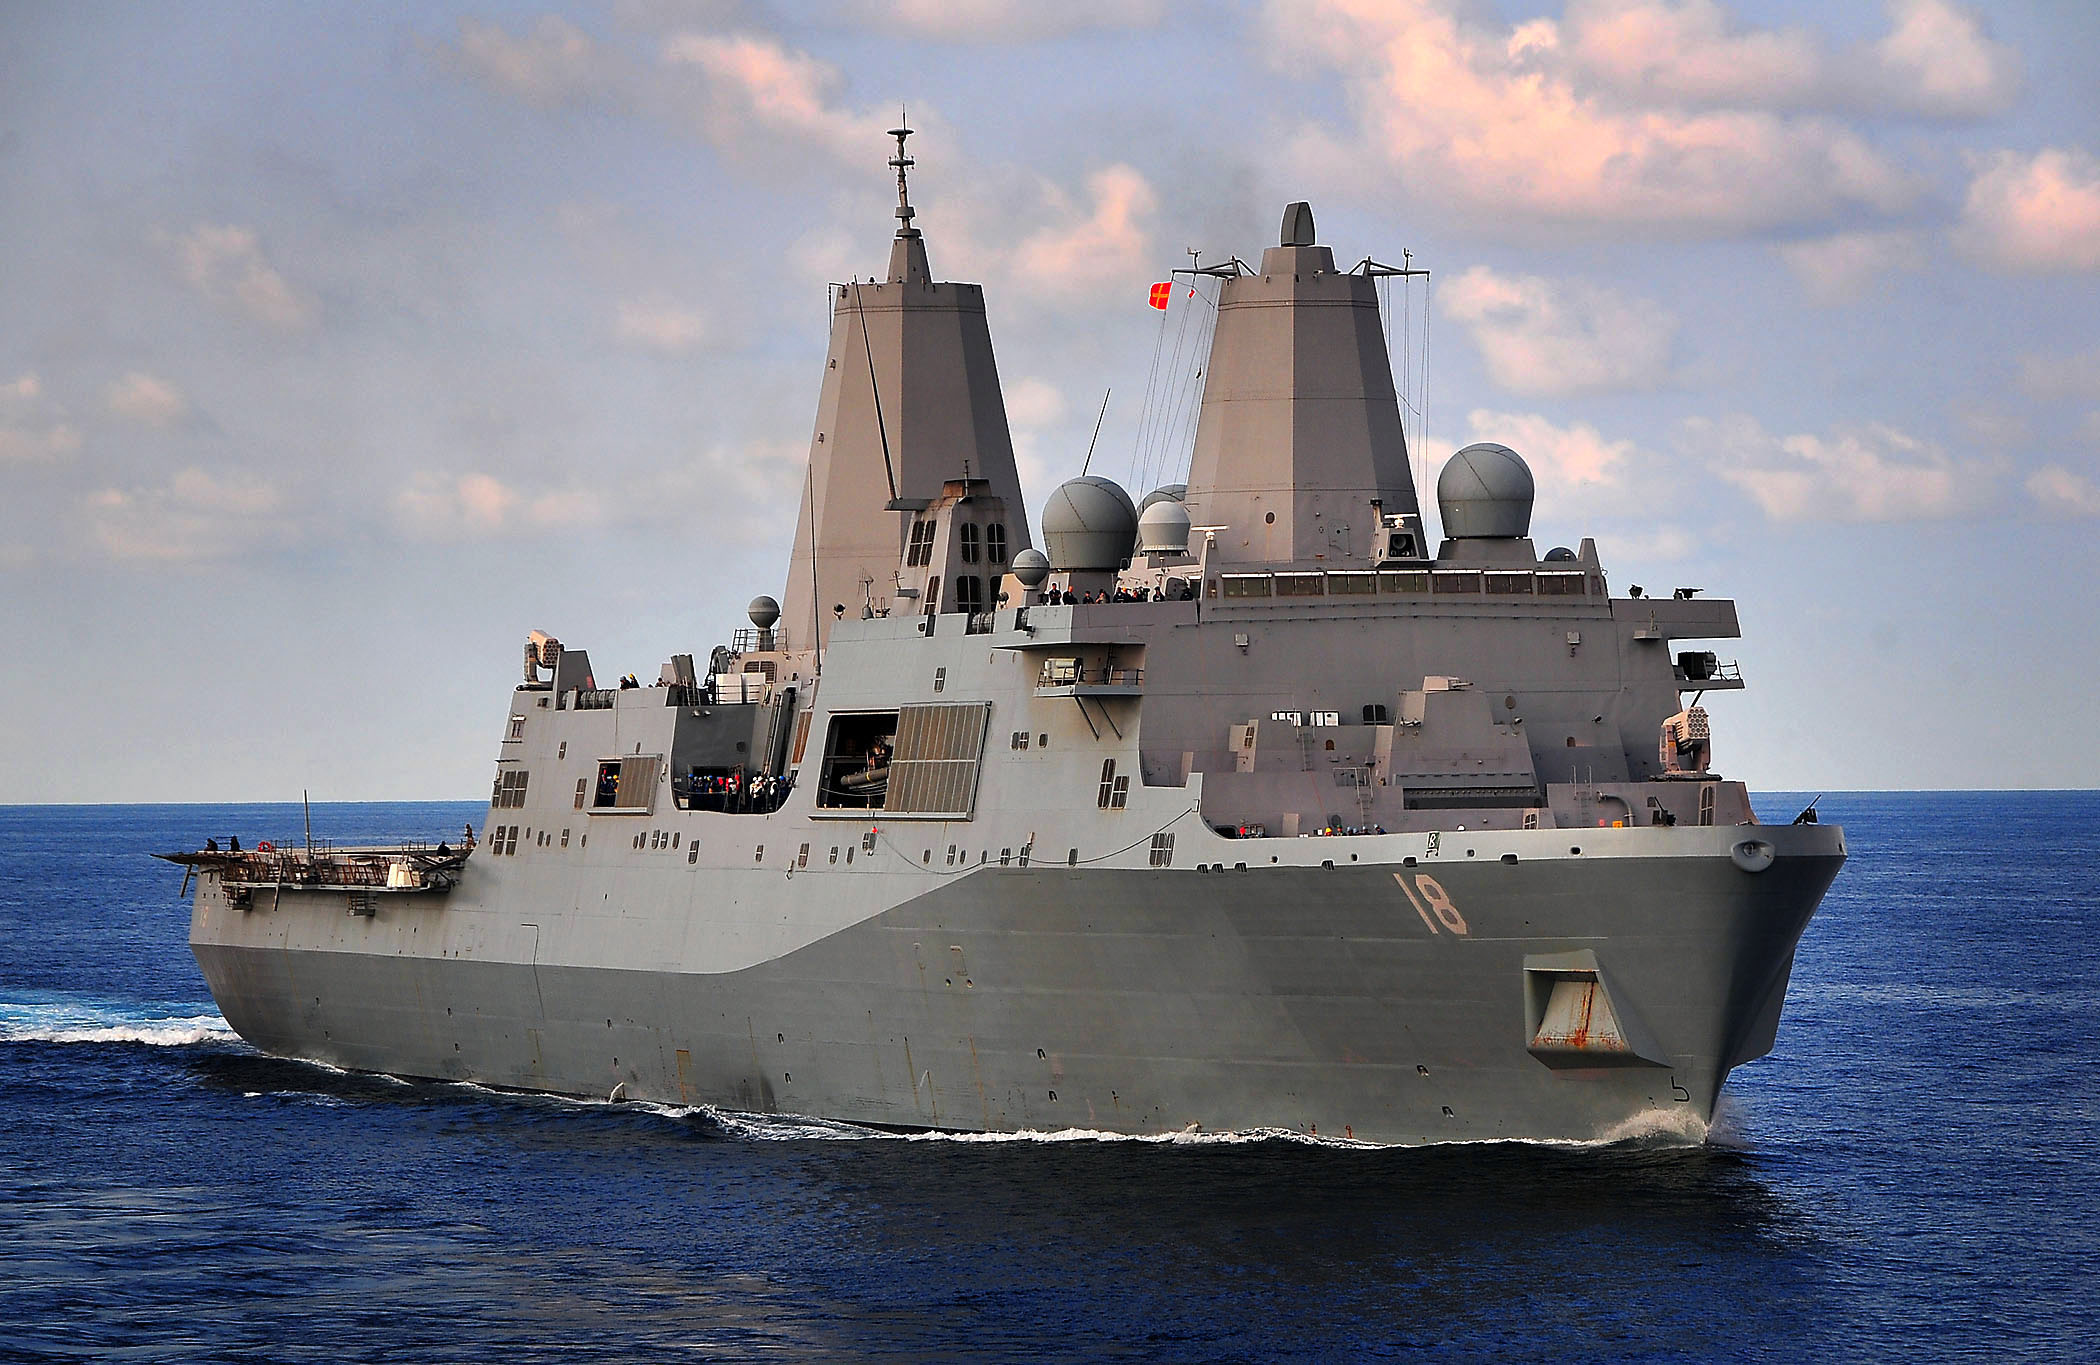 US_Navy_090702-N-4774B-029_Amphibious_transport_dock_ship_USS_New_Orleans_(LPD_18)_conducts_operations_in_preparation_for_an_underway_replenishment.jpg